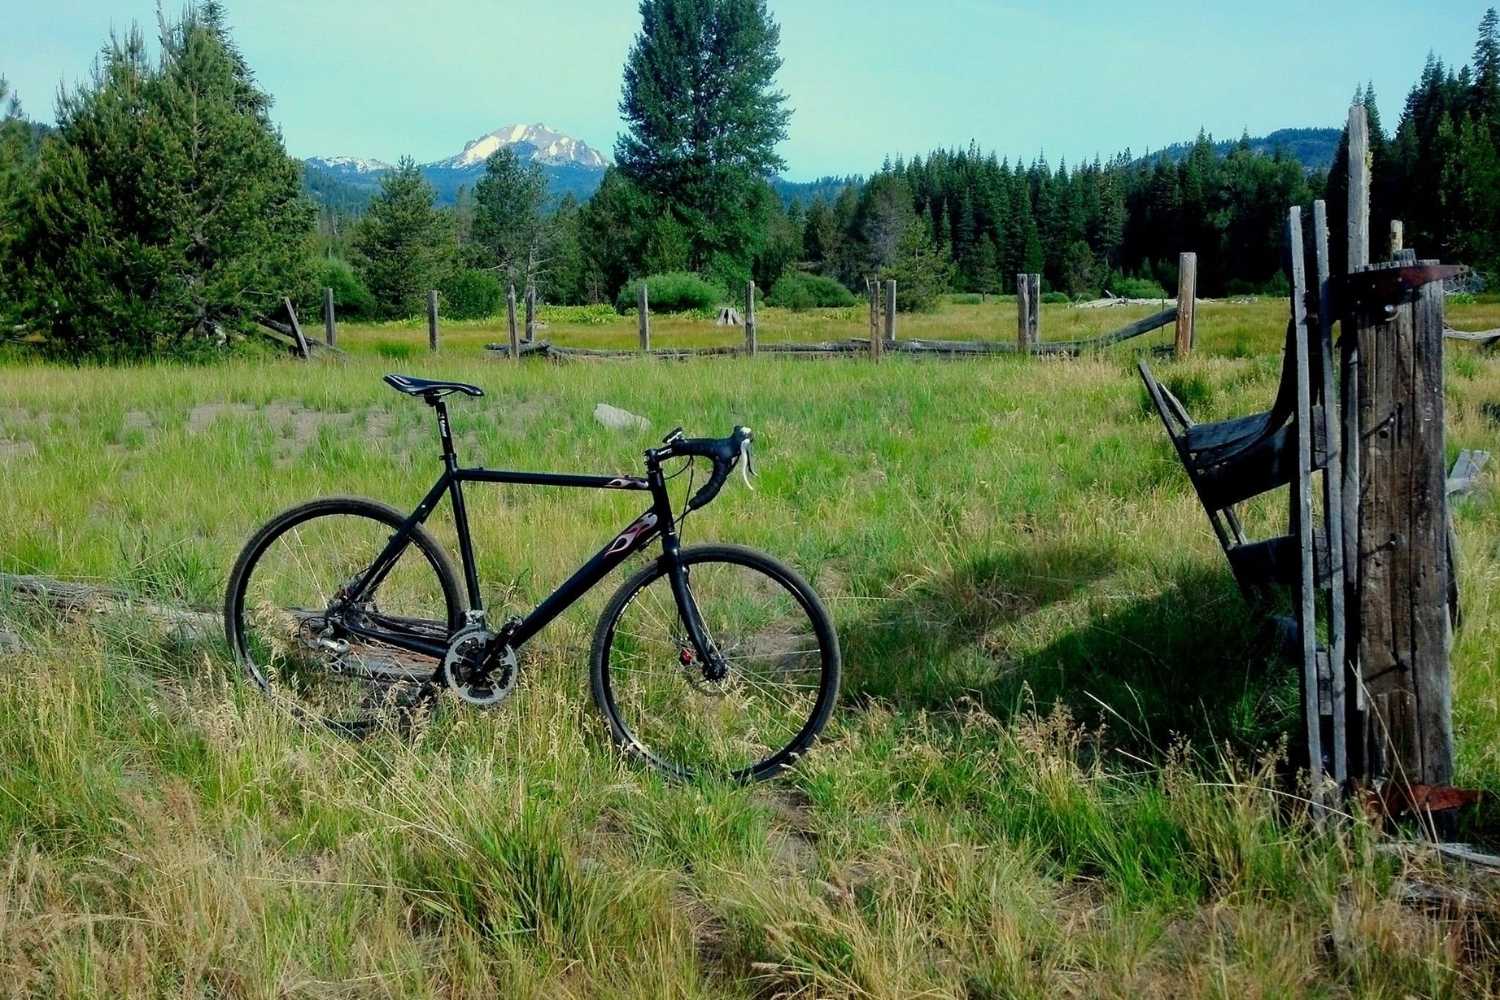 Bike leaning against fence with meadow and lassen peak in bacground